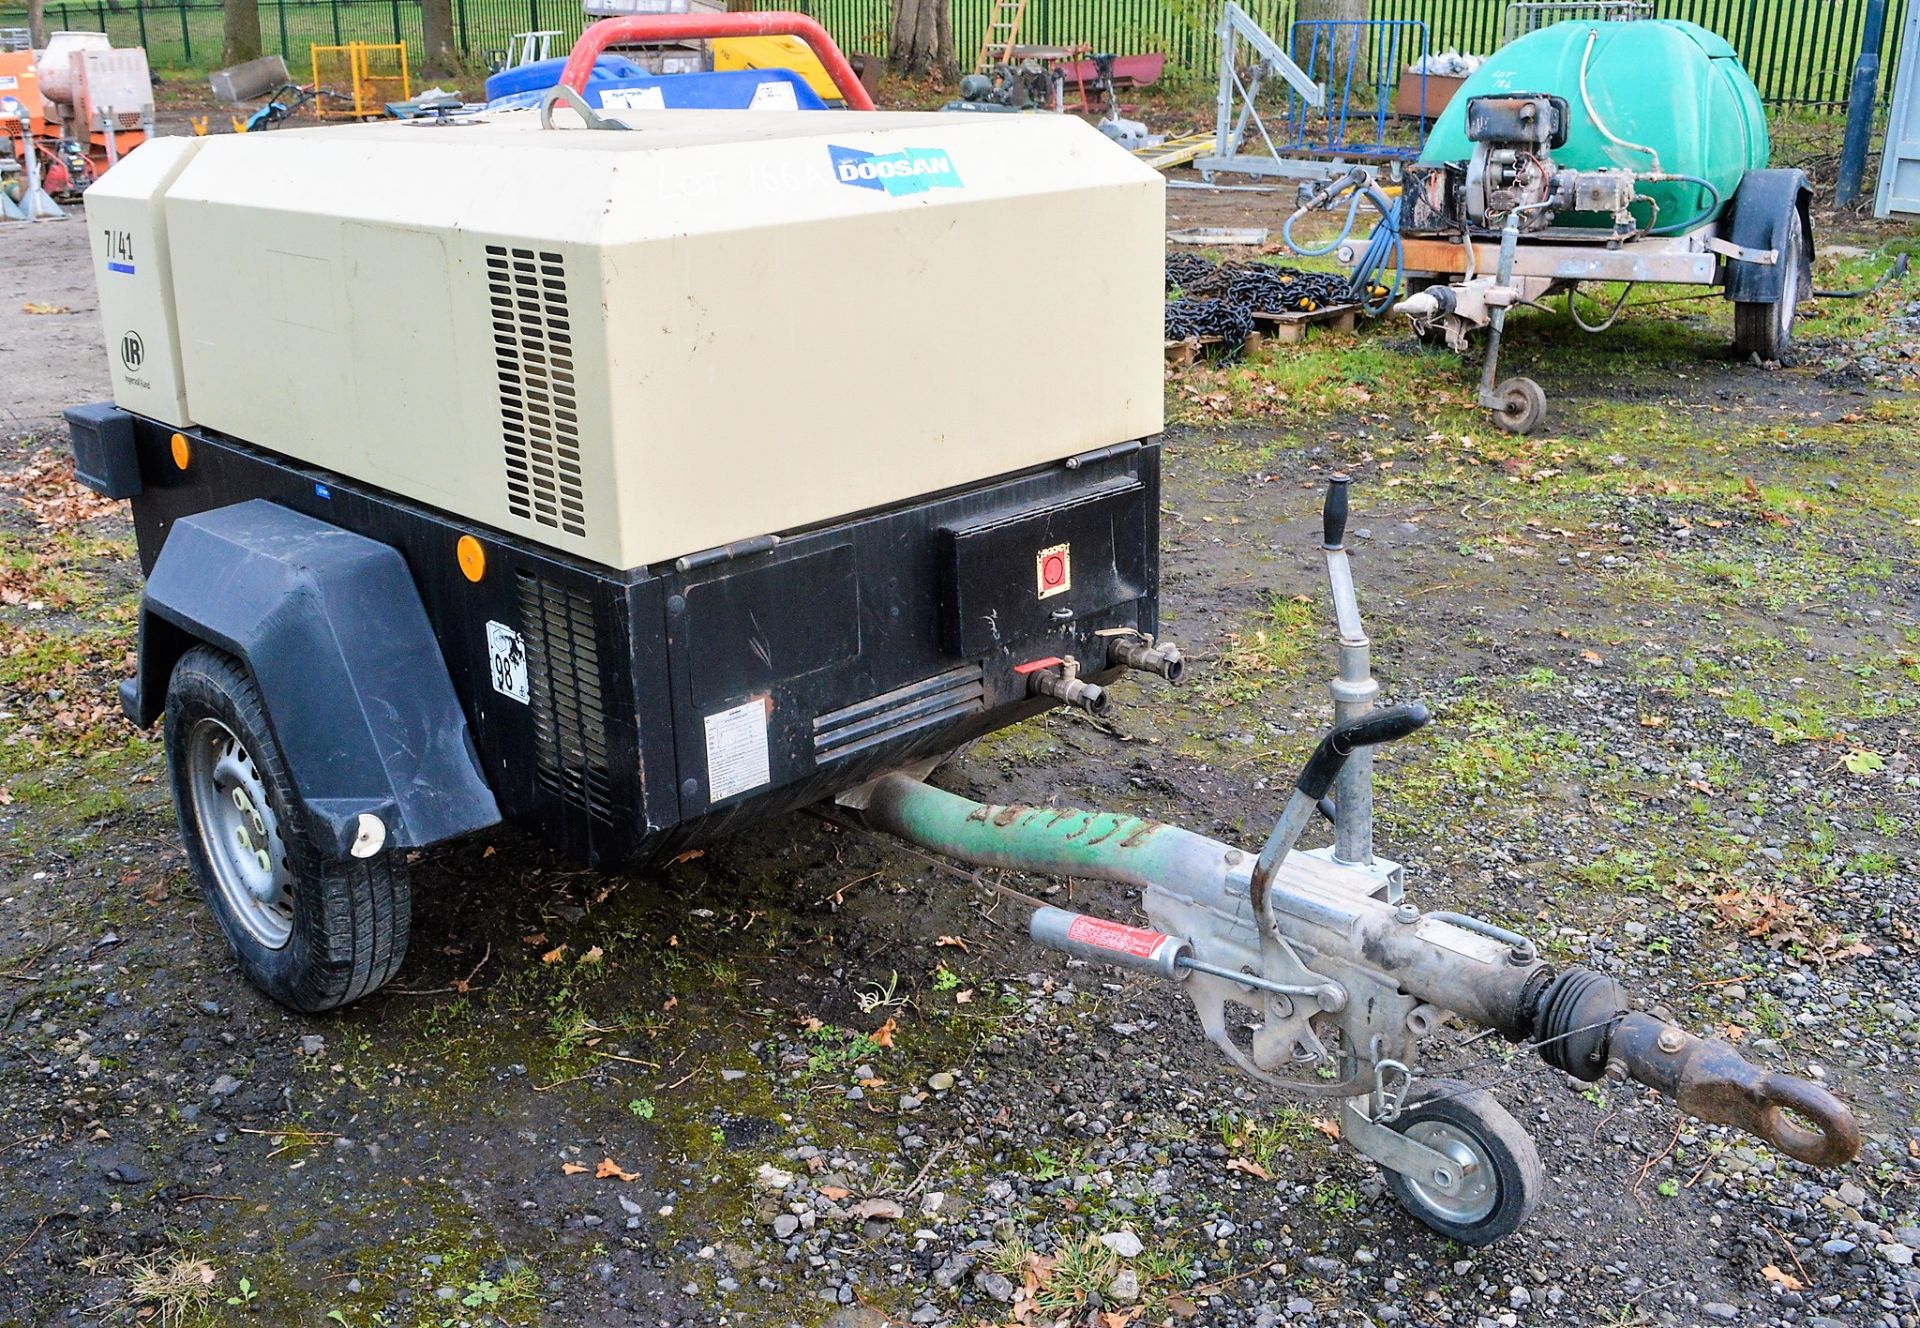 Doosan 741 diesel driven mobile air compressor Year: 2012 S/N: 431251 Recorded Hours: 731 A577337